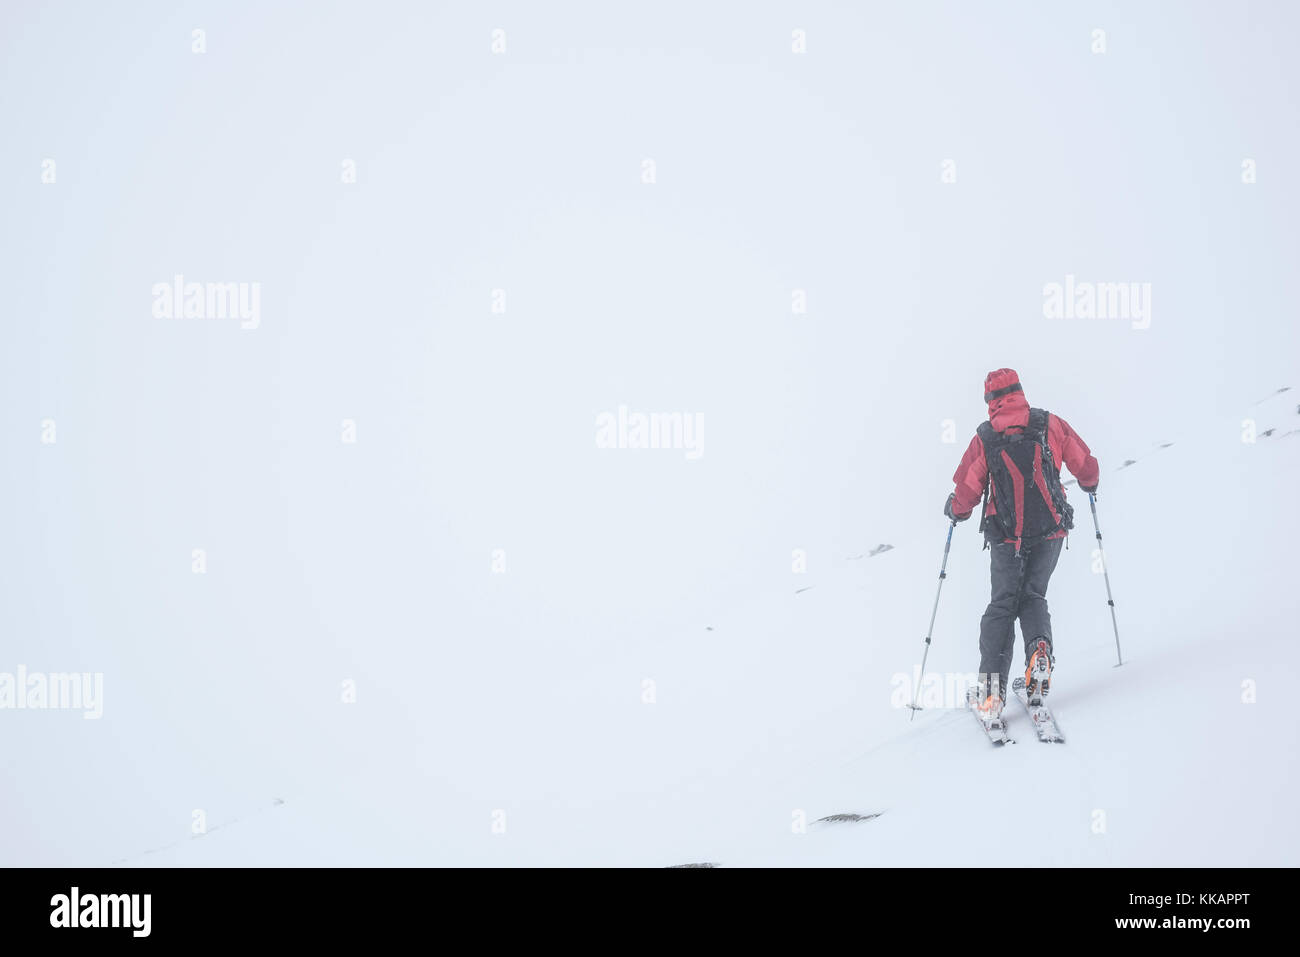 Ski touring in a snow blizzard white out at CairnGorm Mountain Ski Resort, Cairngorms National Park, Scotland, United Kingdom, Europe Stock Photo